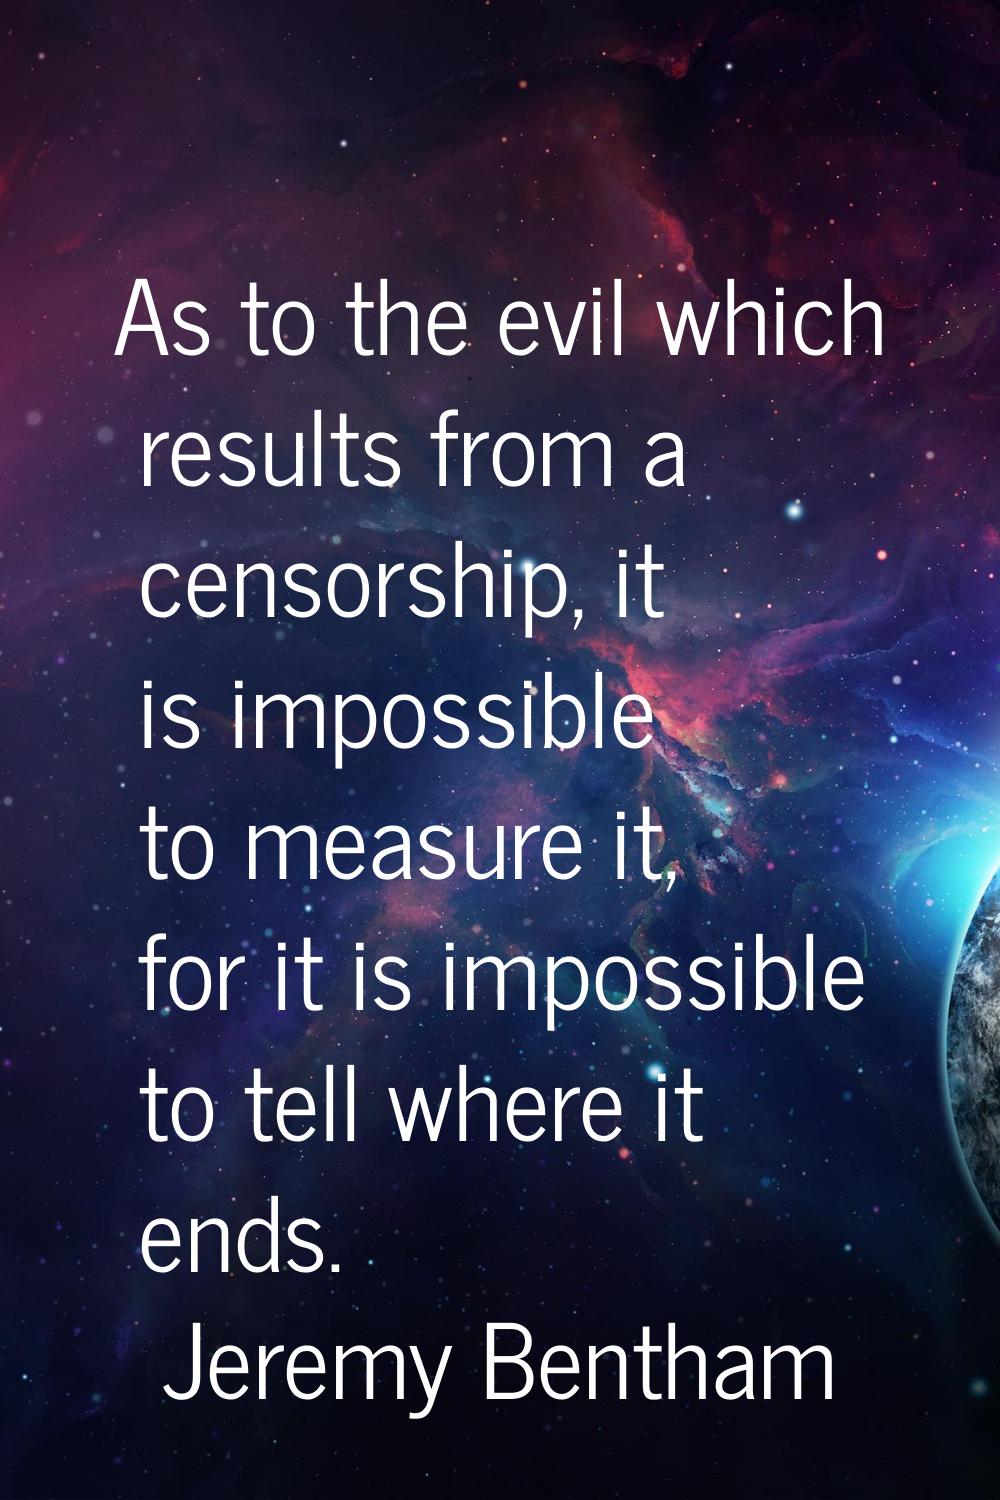 As to the evil which results from a censorship, it is impossible to measure it, for it is impossibl